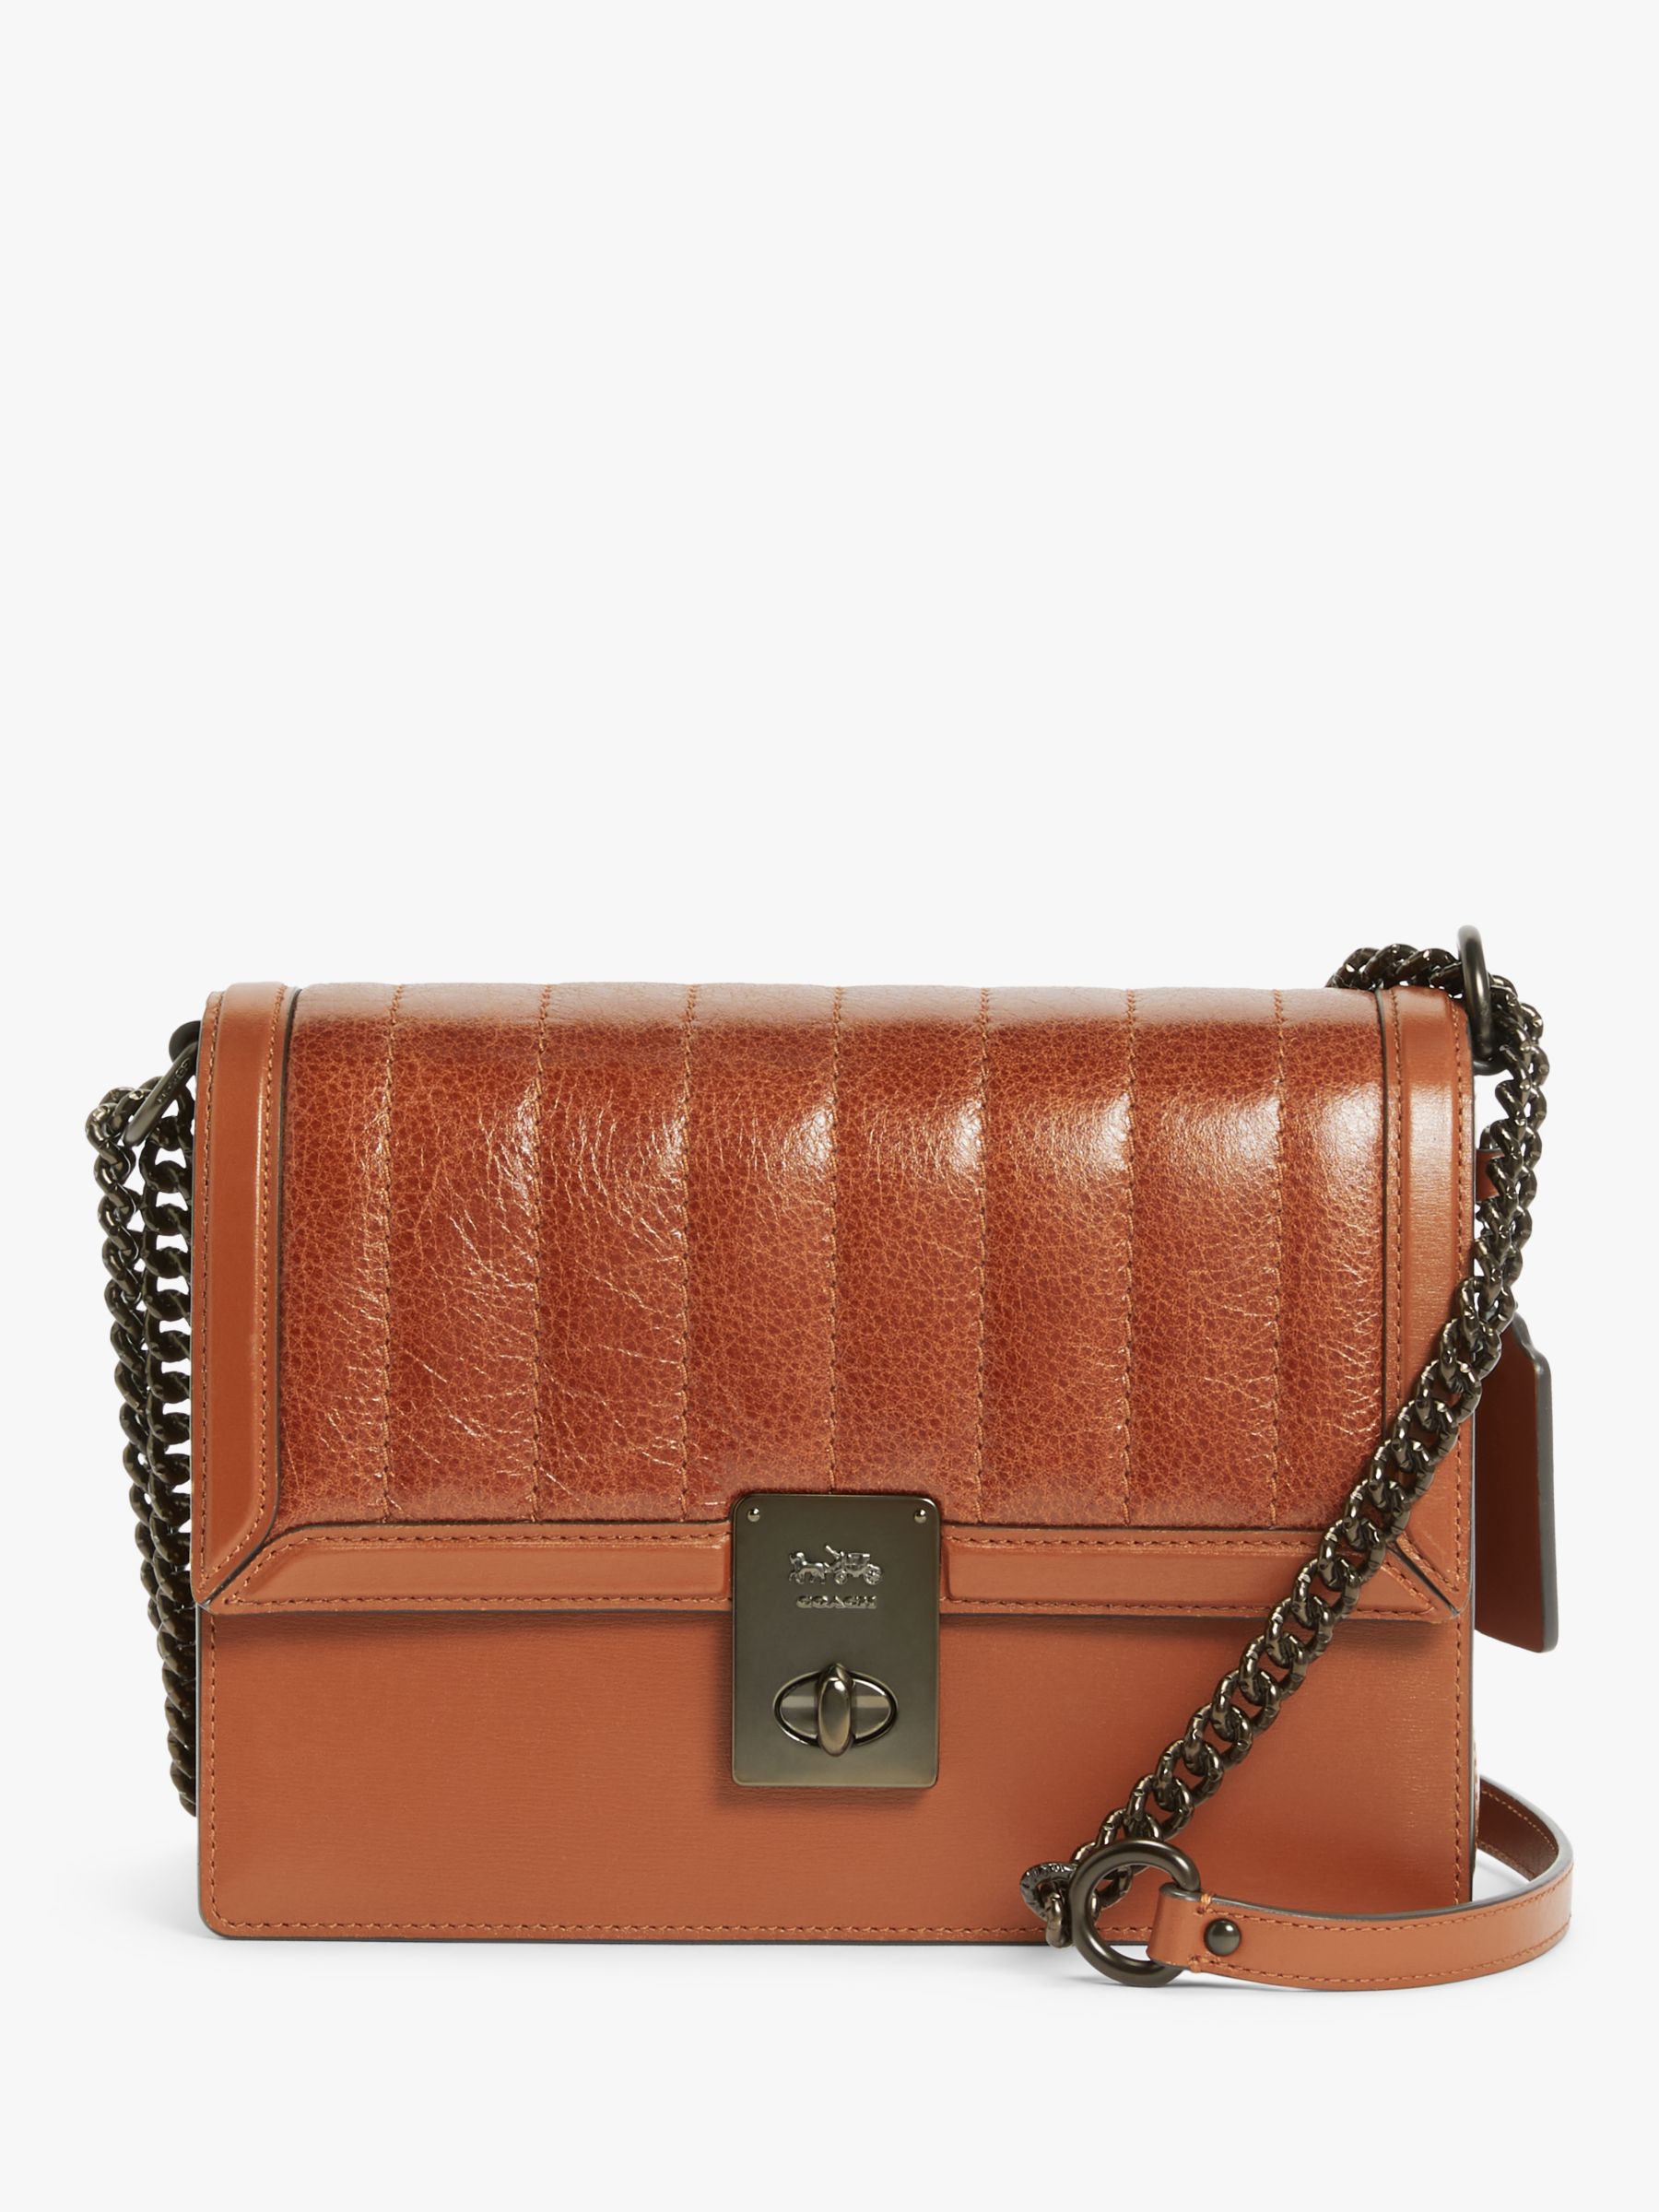 Coach Hutton Quilted Leather Shoulder Bag at John Lewis & Partners